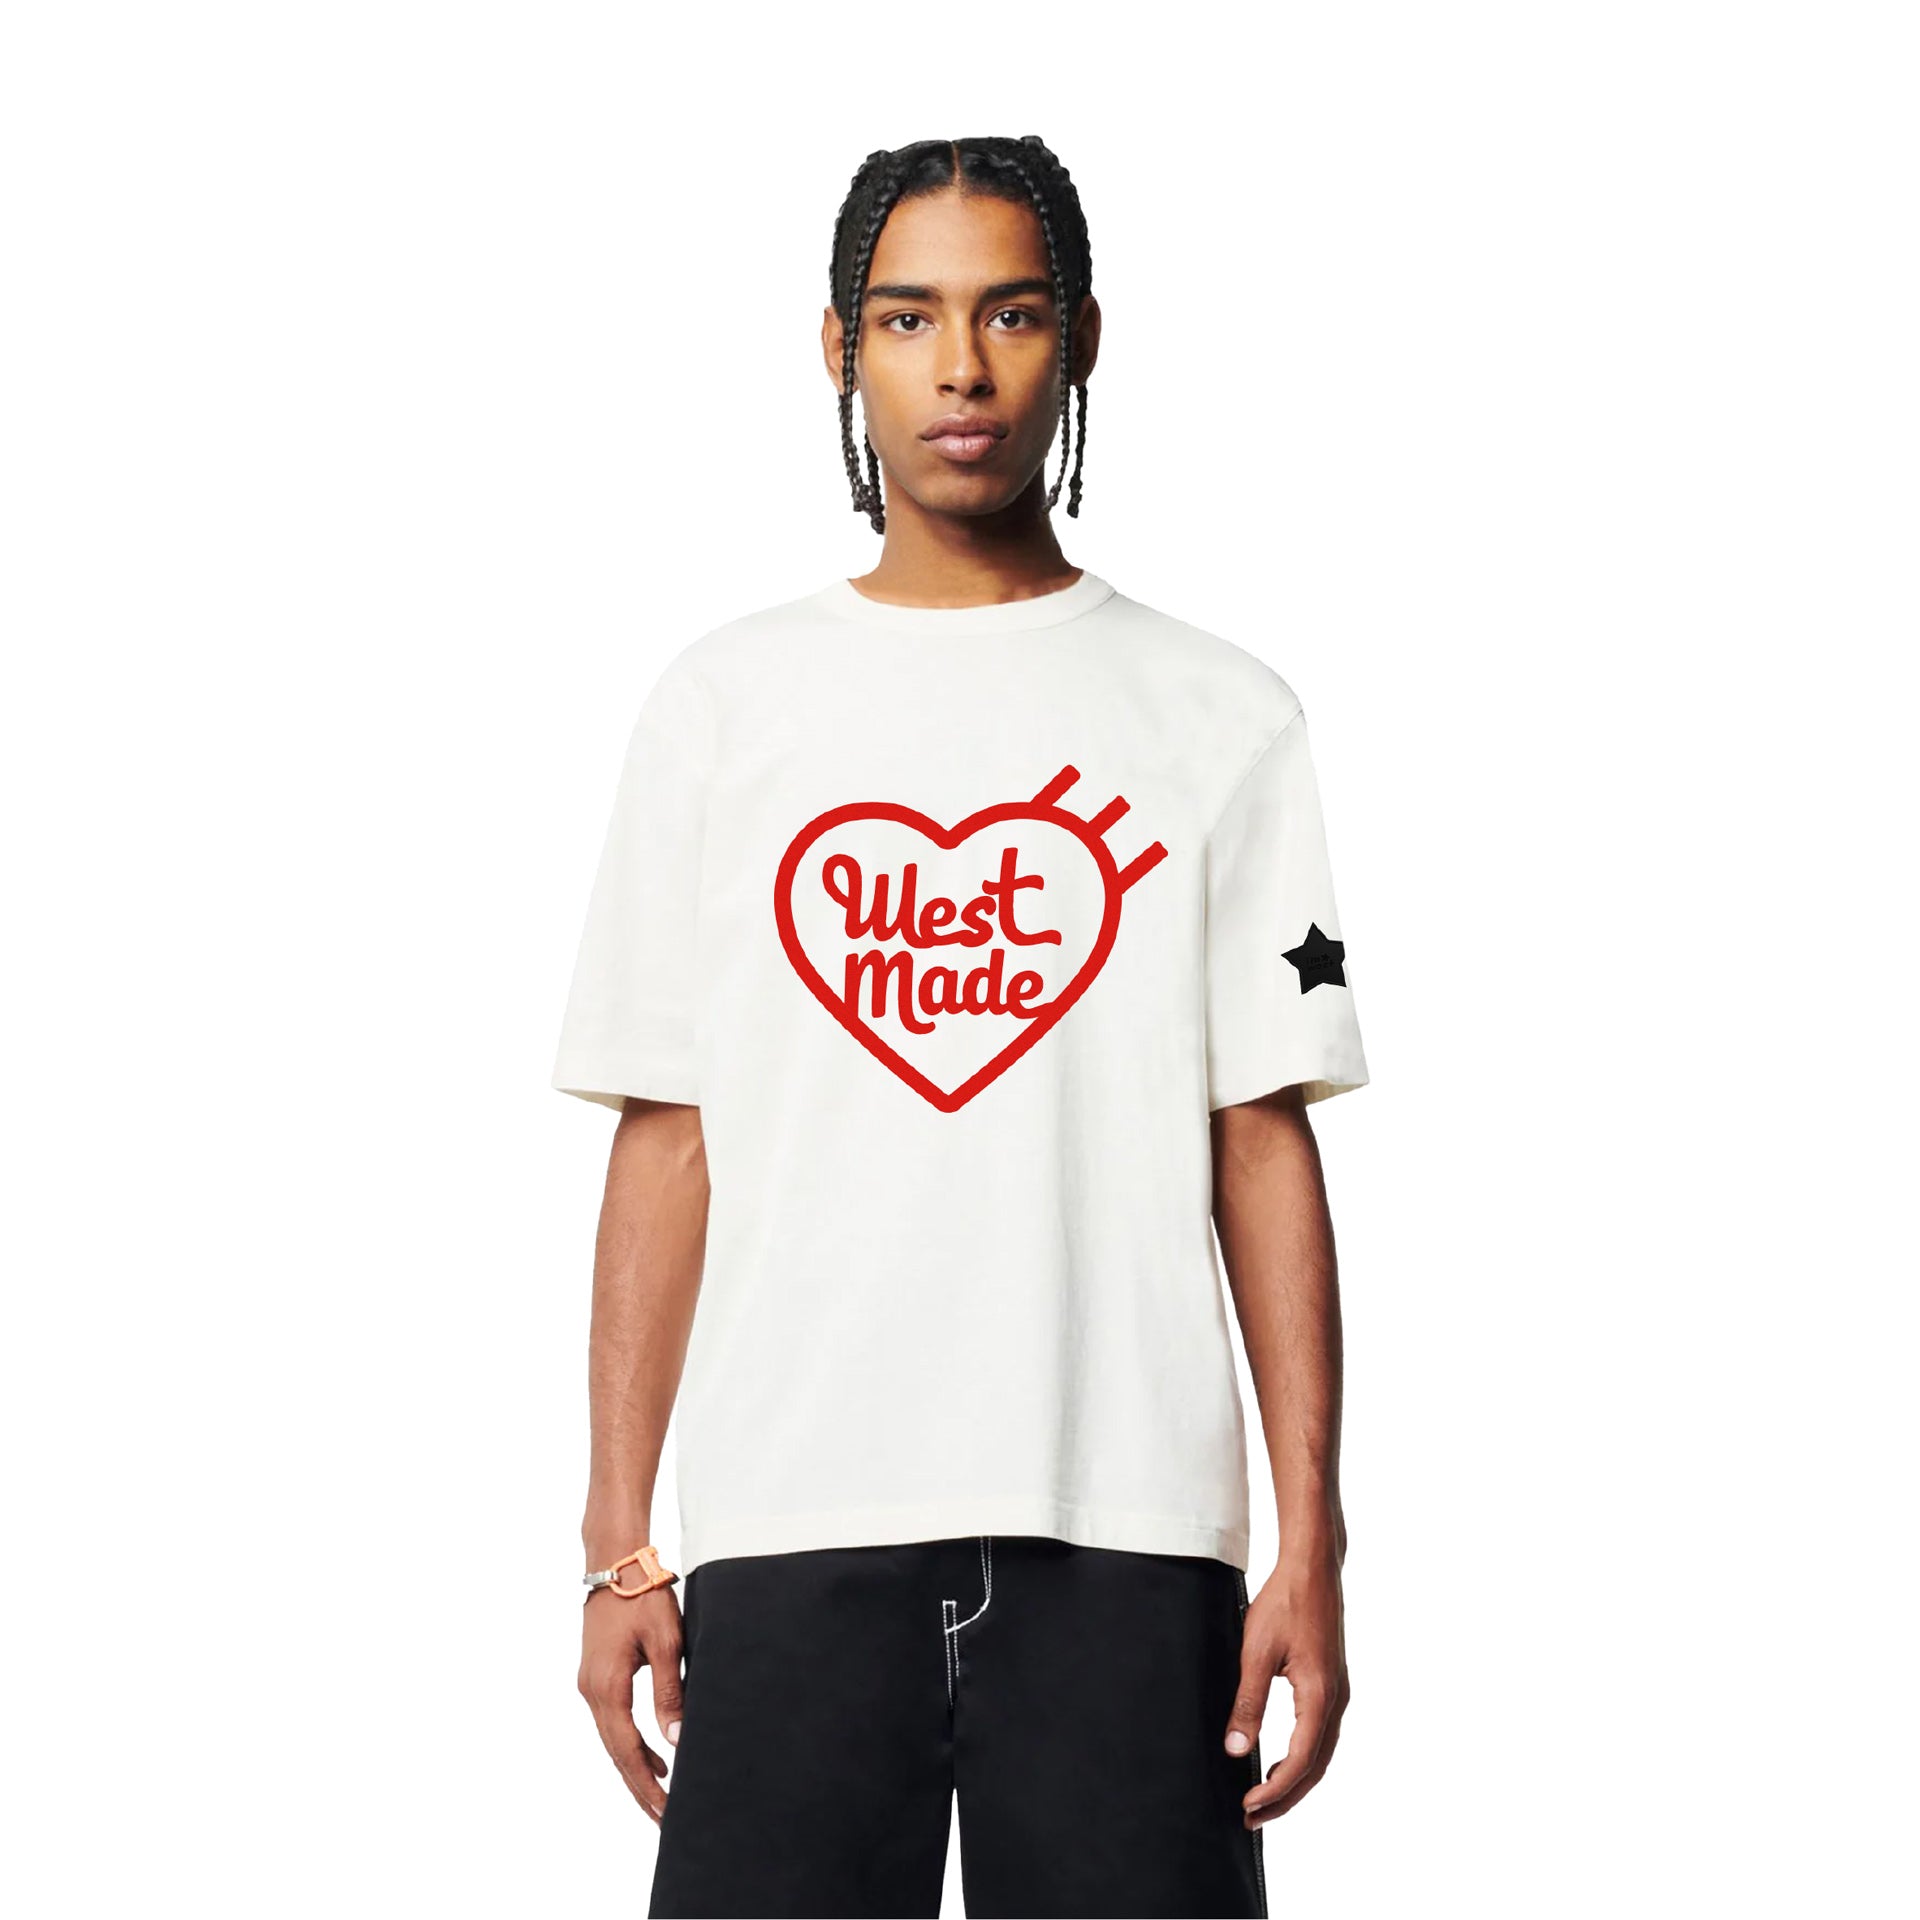 White T-shirt With West Made Heart print From I'm West